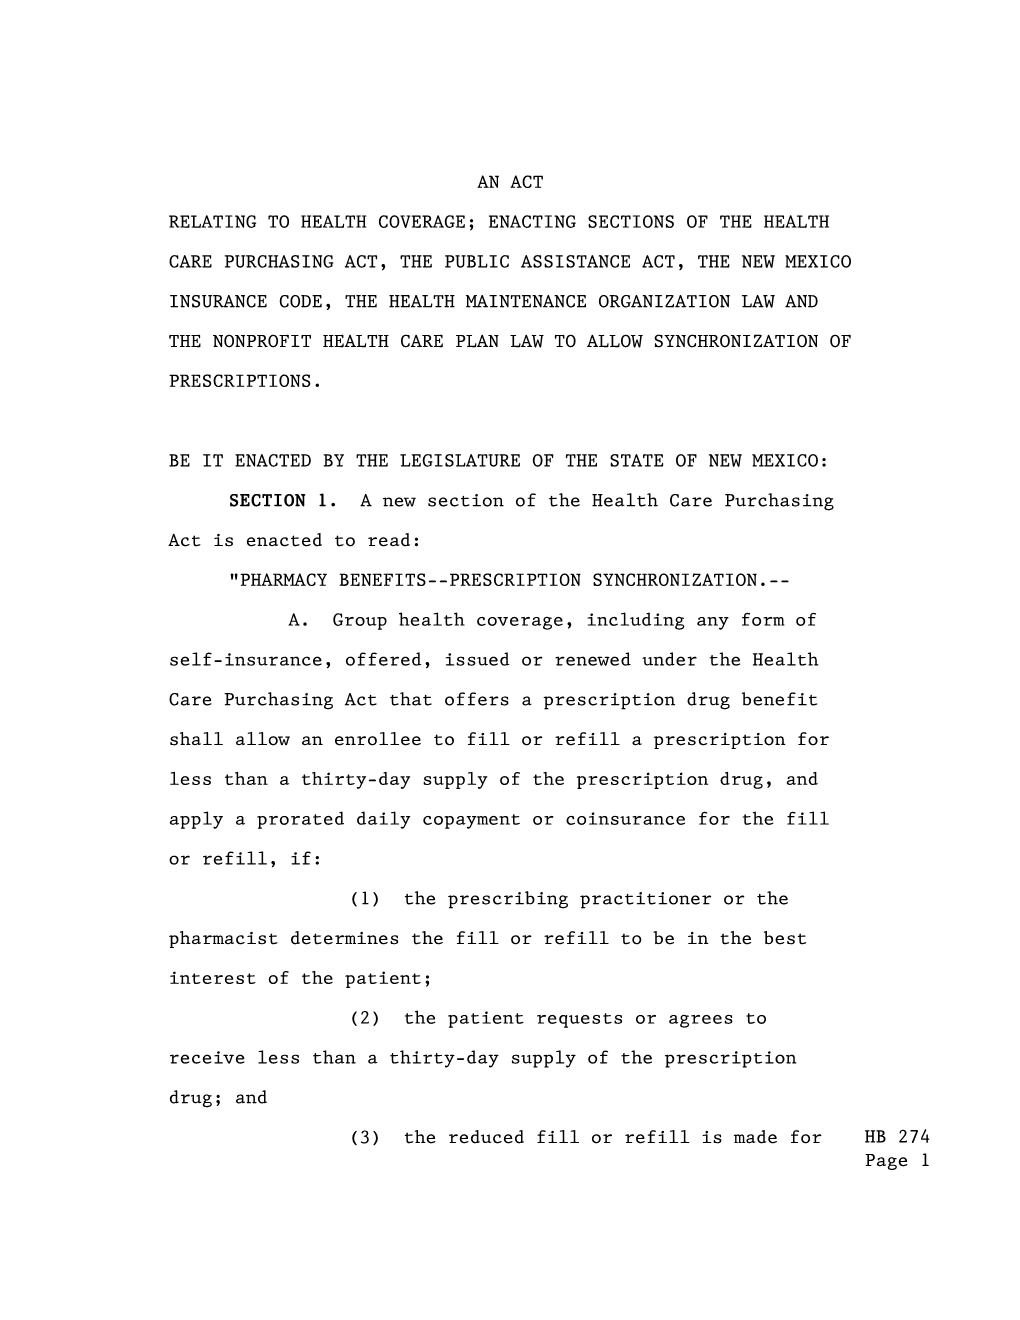 HB 274 Page 1 an ACT RELATING to HEALTH COVERAGE